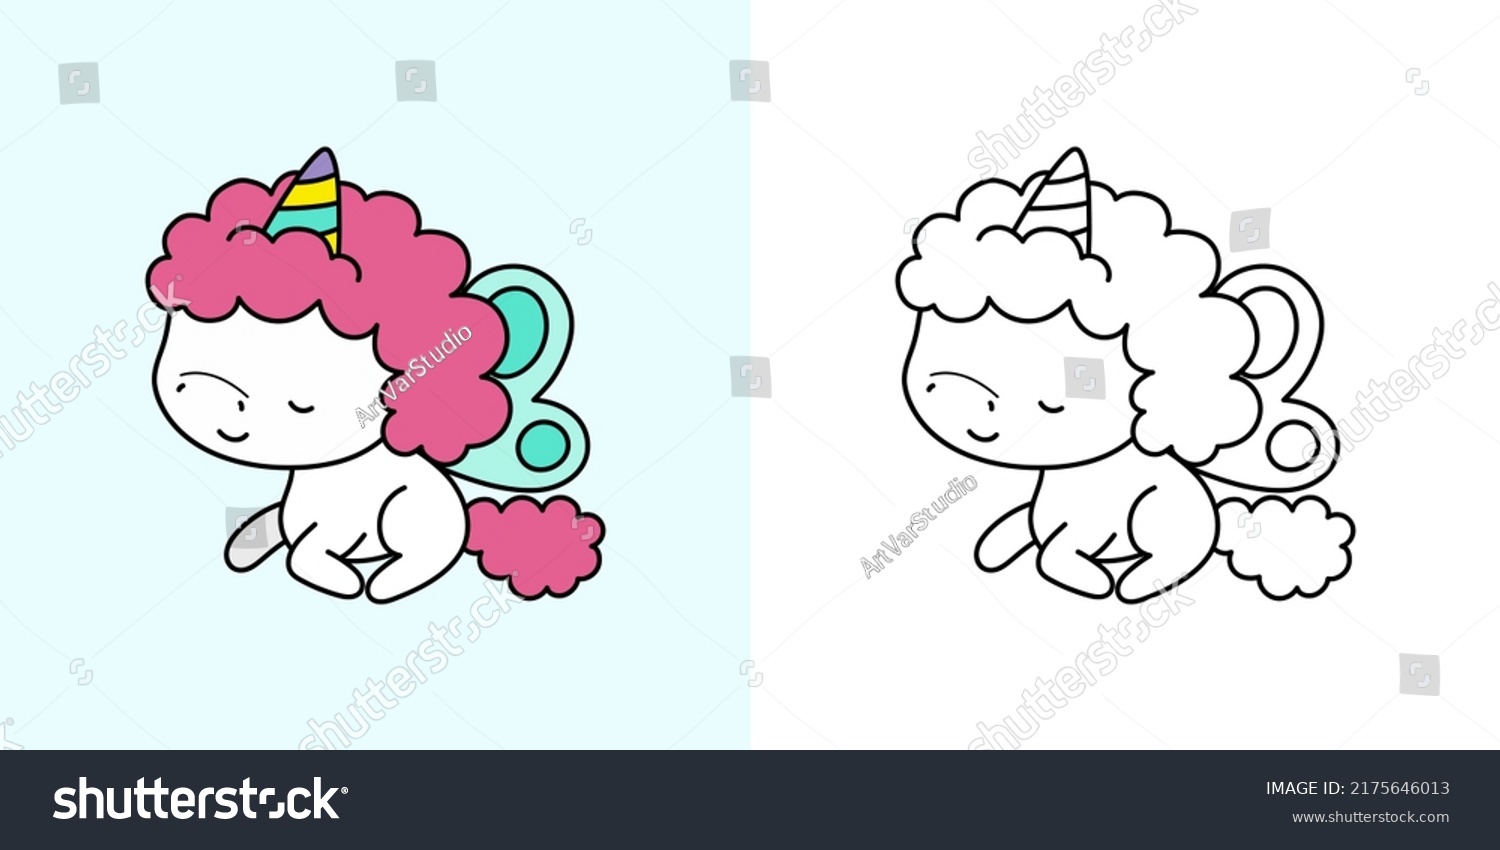 SVG of Clipart Unicorn Multicolored and Black and White. Cute Clip Art Unicorn. Vector Illustration of a Kawaii Animal for Stickers, Baby Shower, Coloring Pages, Prints for Clothes.  svg